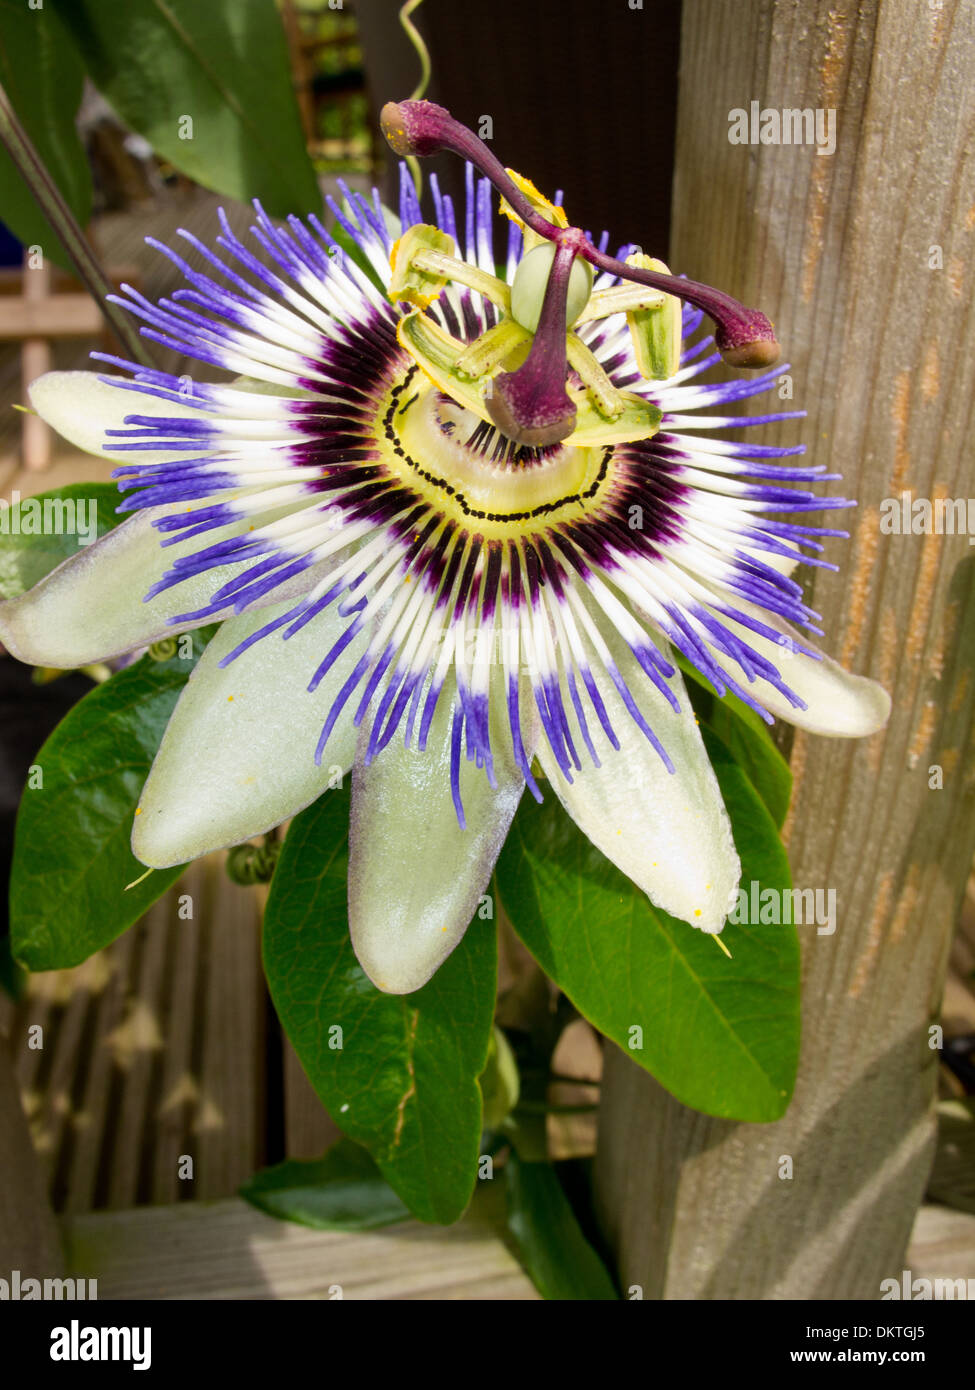 An image of the beautiful flower Passiflora Caerulea also known as the Passion Flower Stock Photo